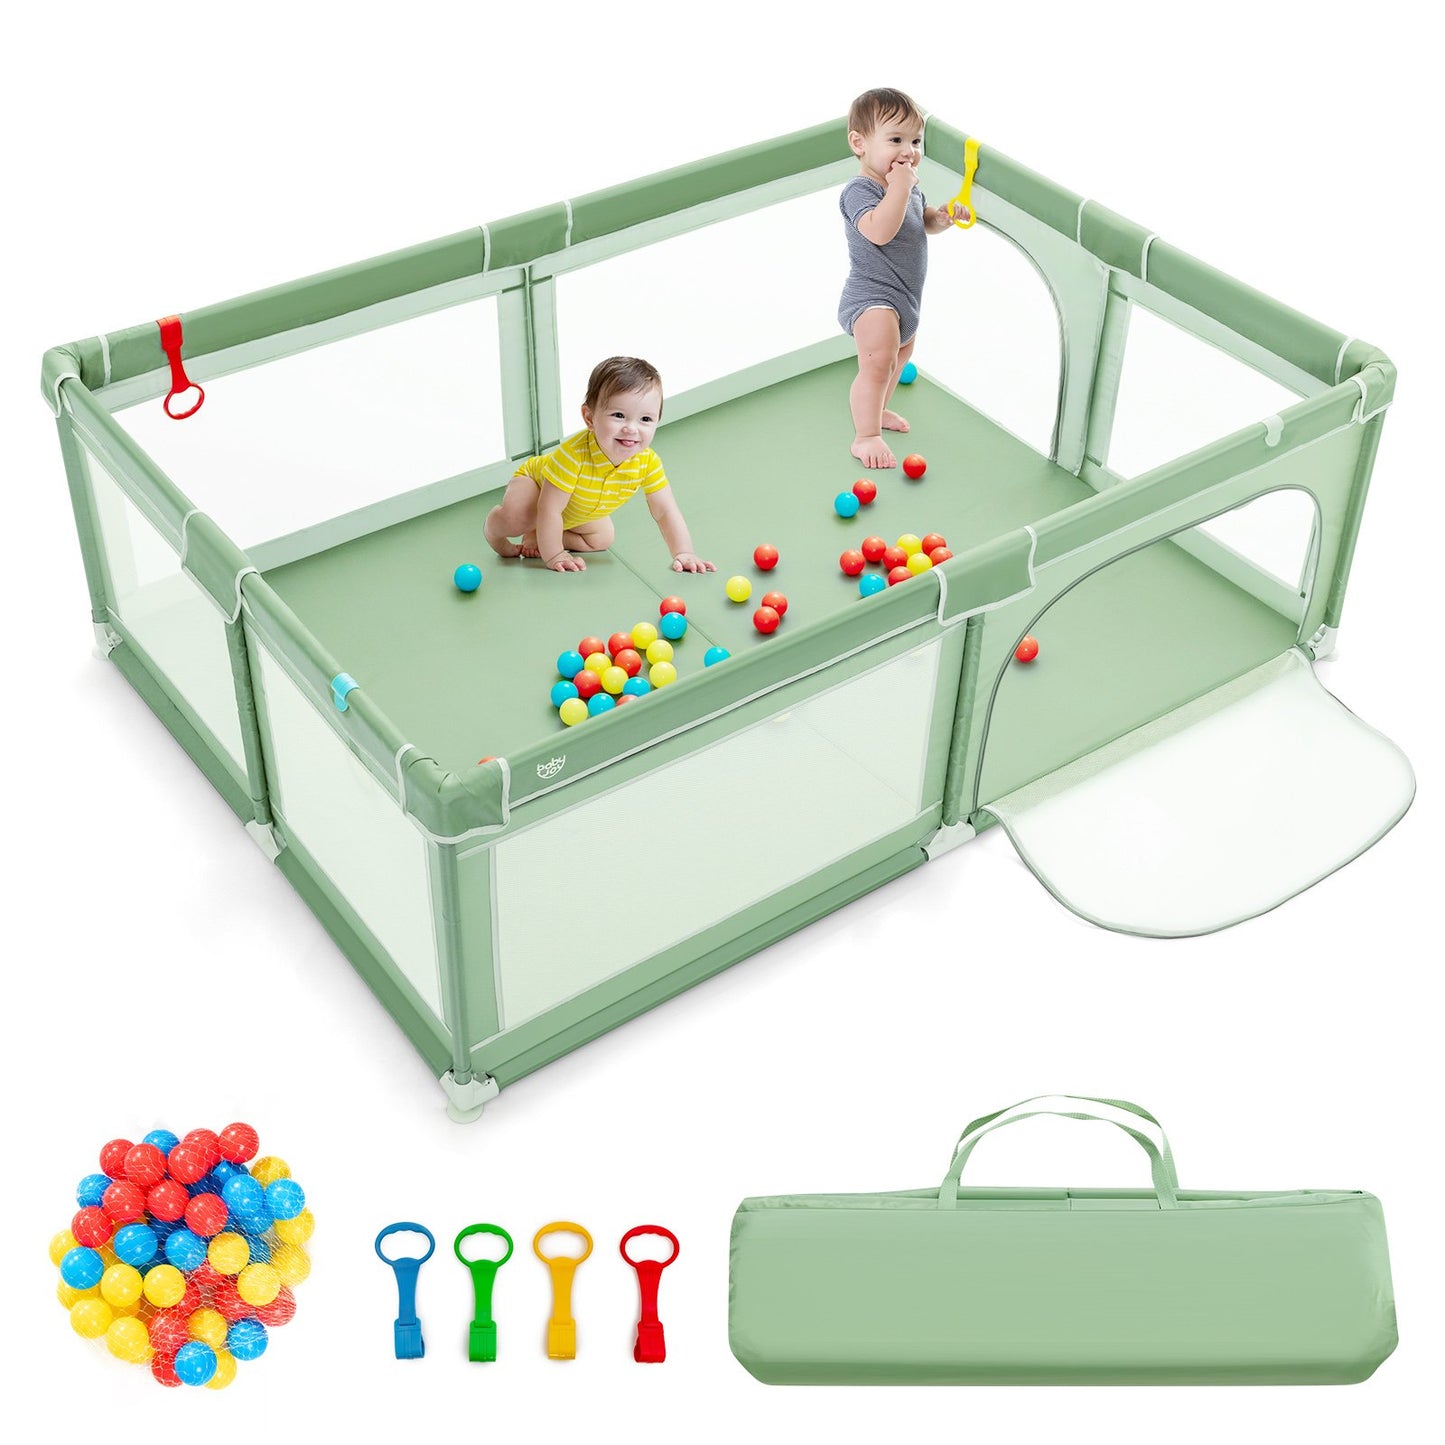 Extra-Large Safety Baby Fence with 50 Ocean Balls, Green